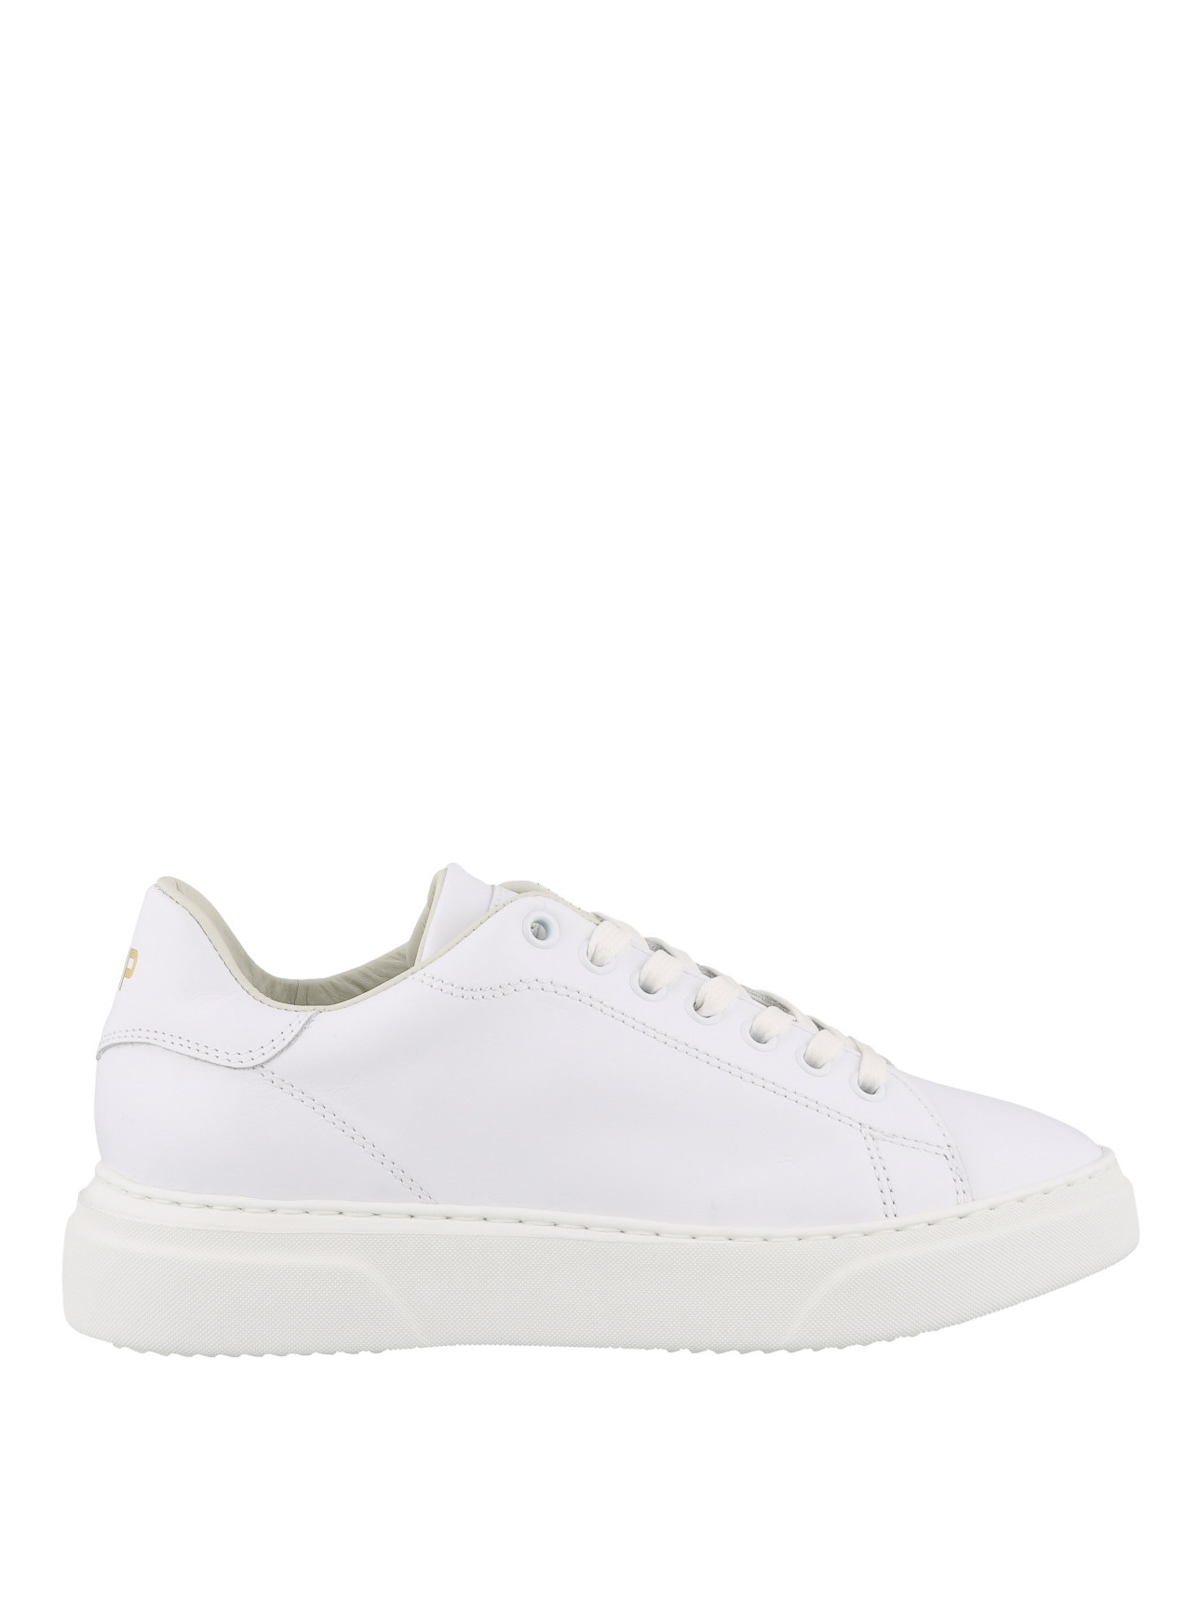 Philippe Model - Temple white leather sneakers - trainers - BPLDV001